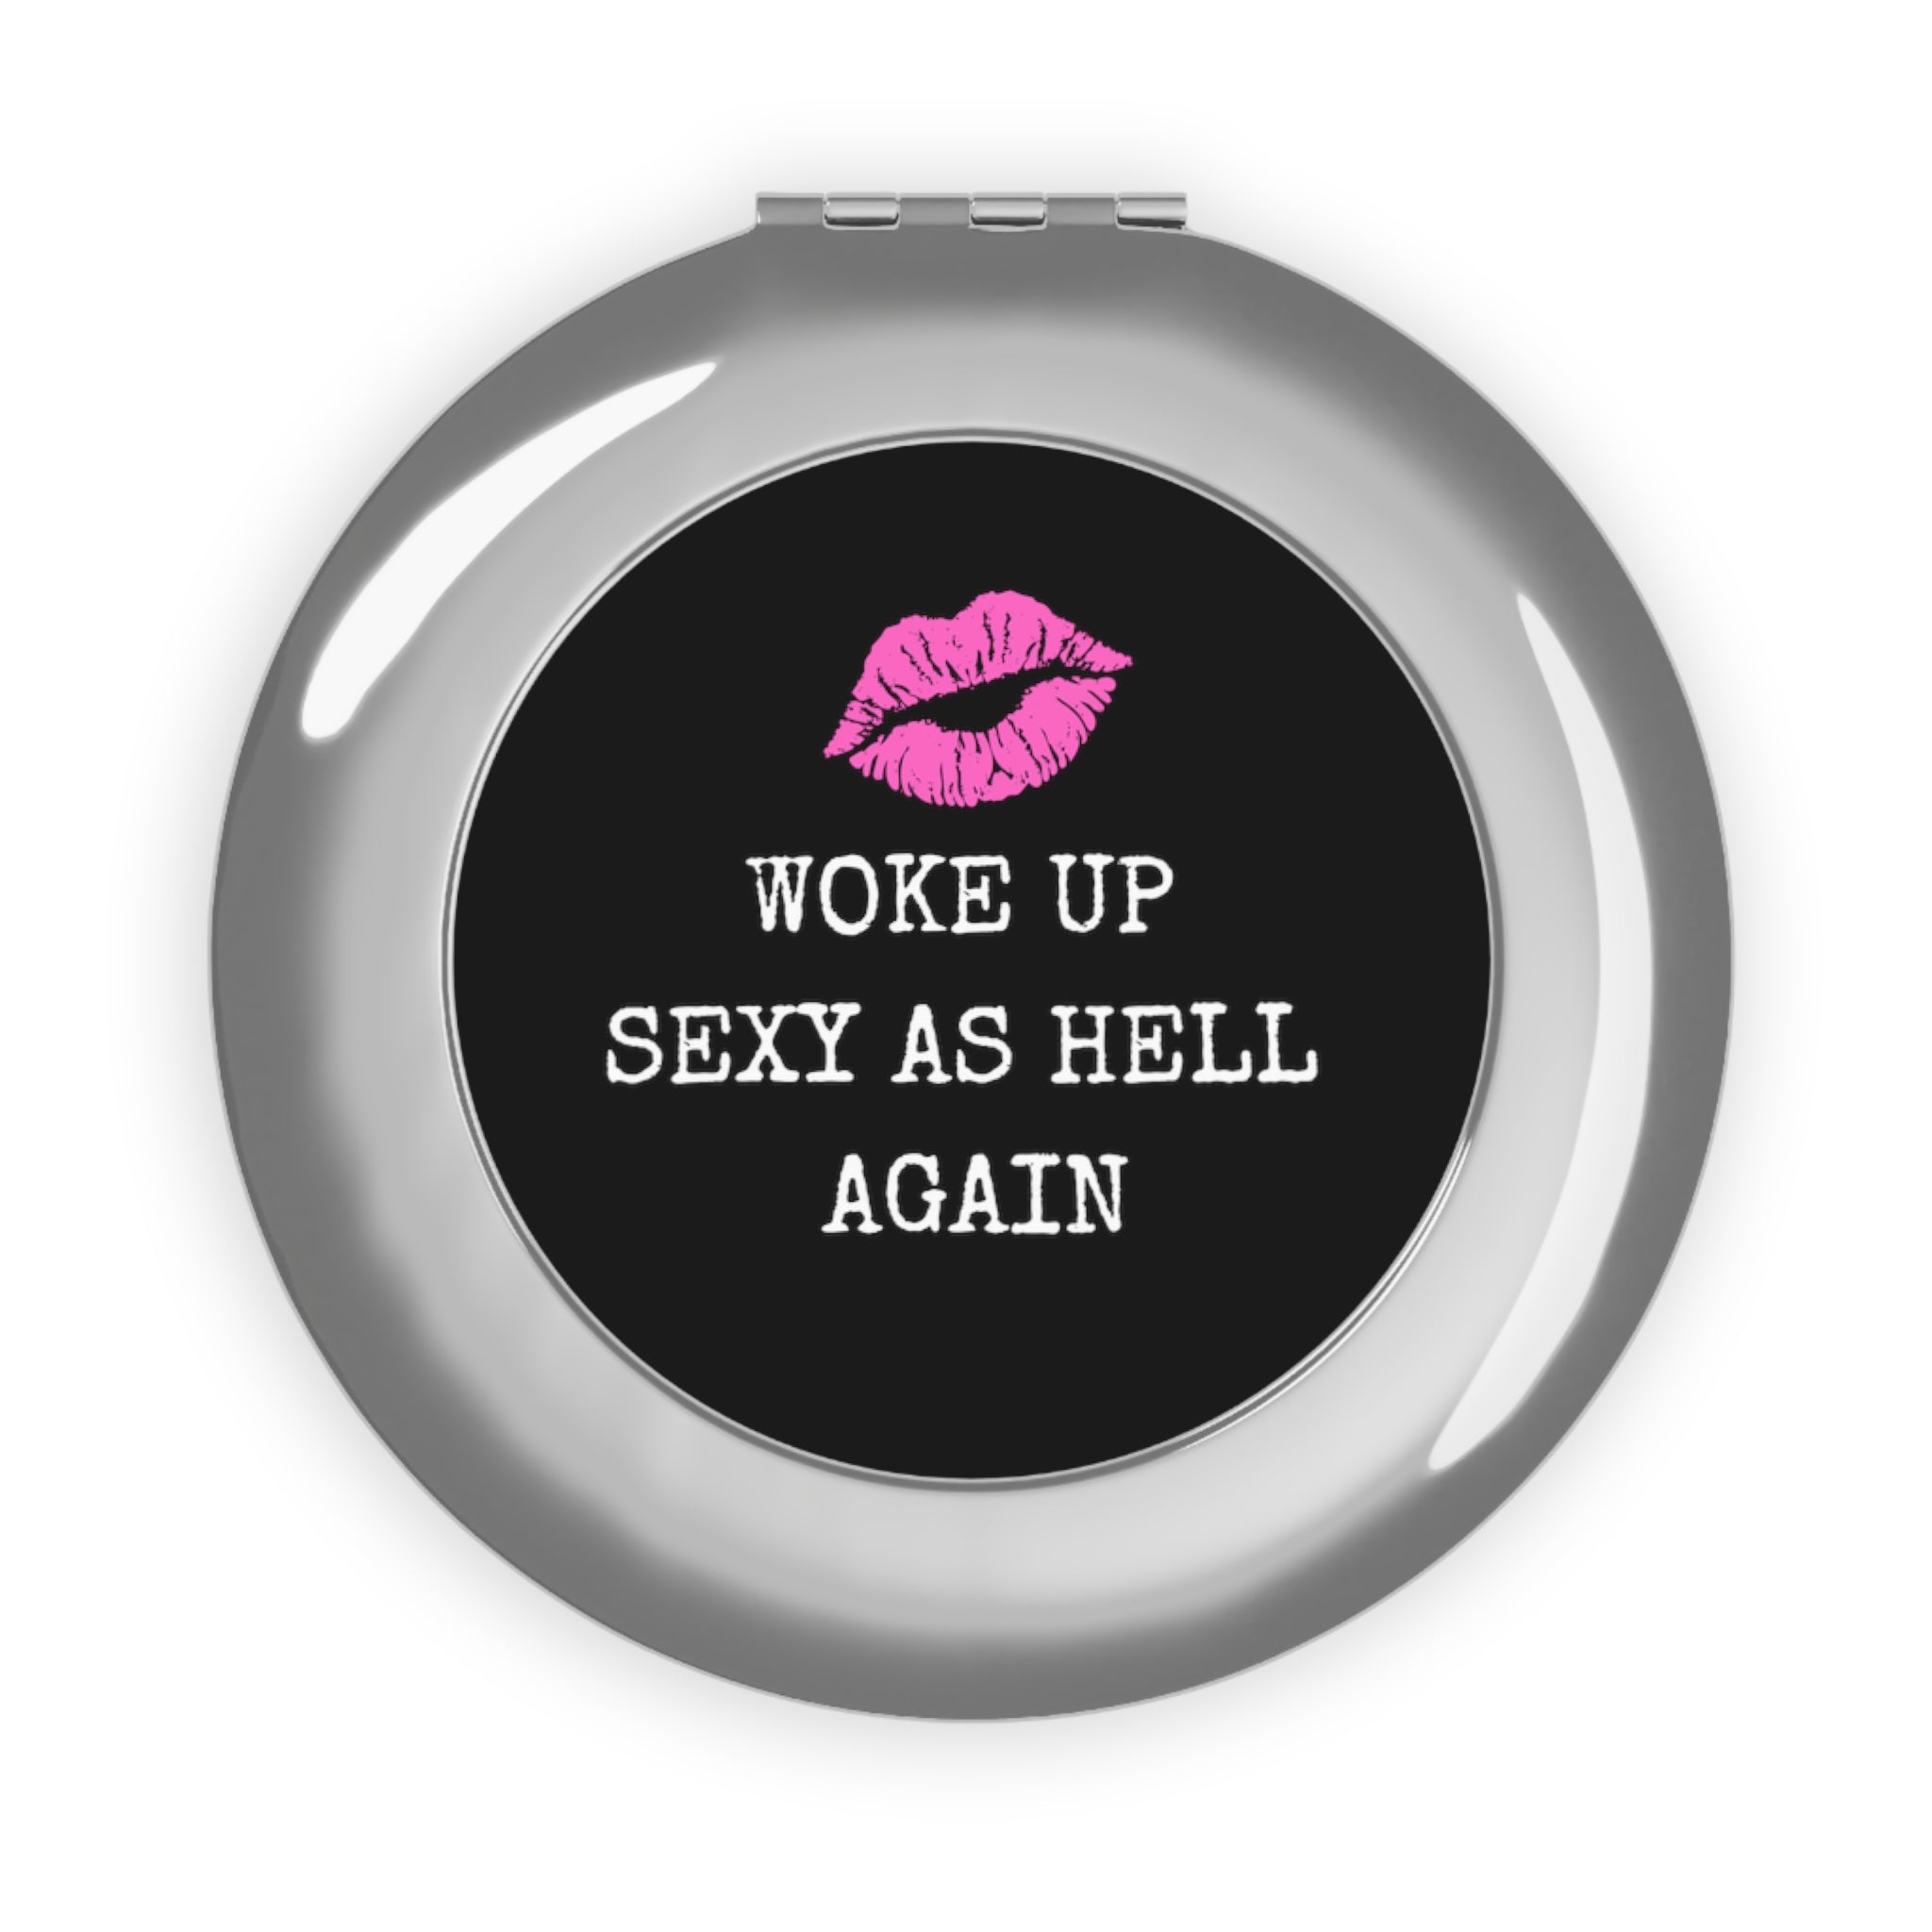 Woke Up Sexy As Hell Again Compact Travel Mirror, Makeup Mirror, Gift For Her Accessories Silver-Glossy-One-size The Middle Aged Groove